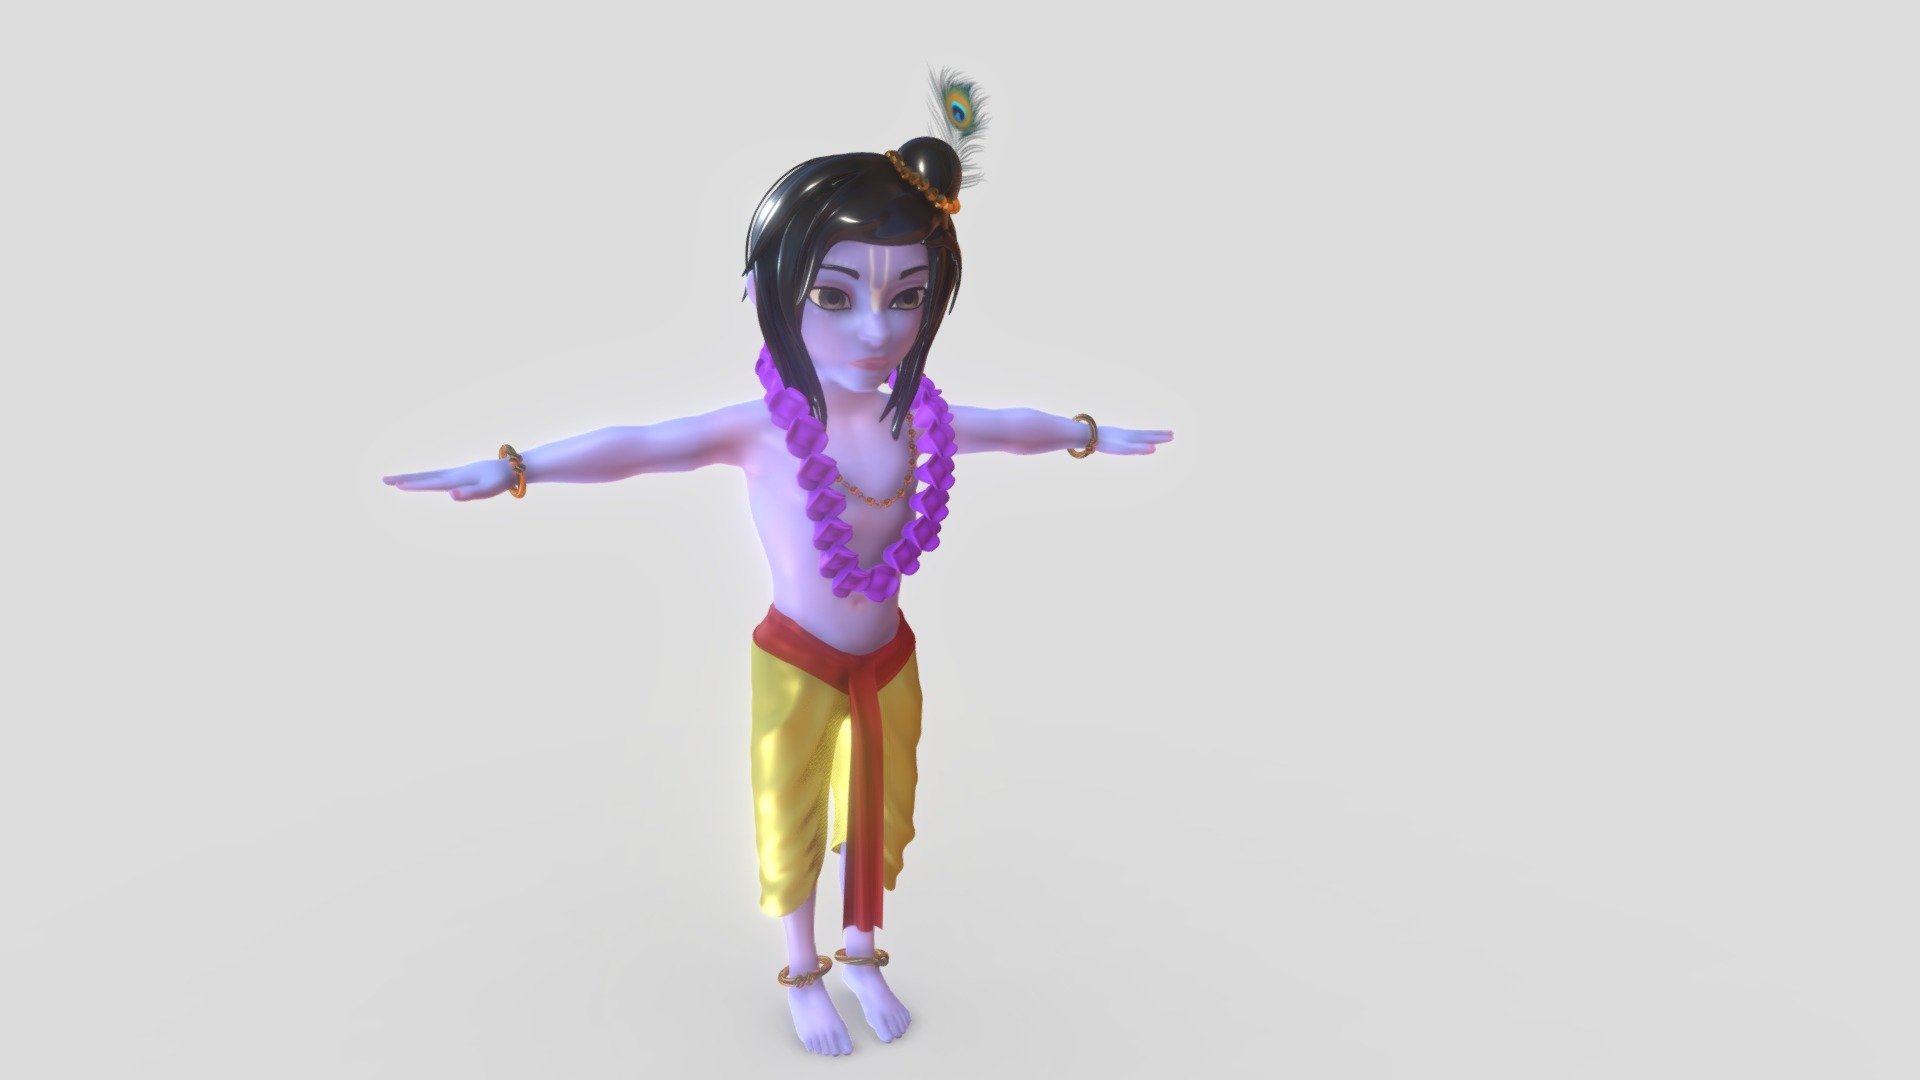 Lord Krishna - 3D character Model

Downlod Low Mesh for Fast Redndering 
Quality Output Render in Less time - Lord Krishna - 3D character Model - 3D model by Kailash H Kanojia (@KailashHKanojia) 3d model